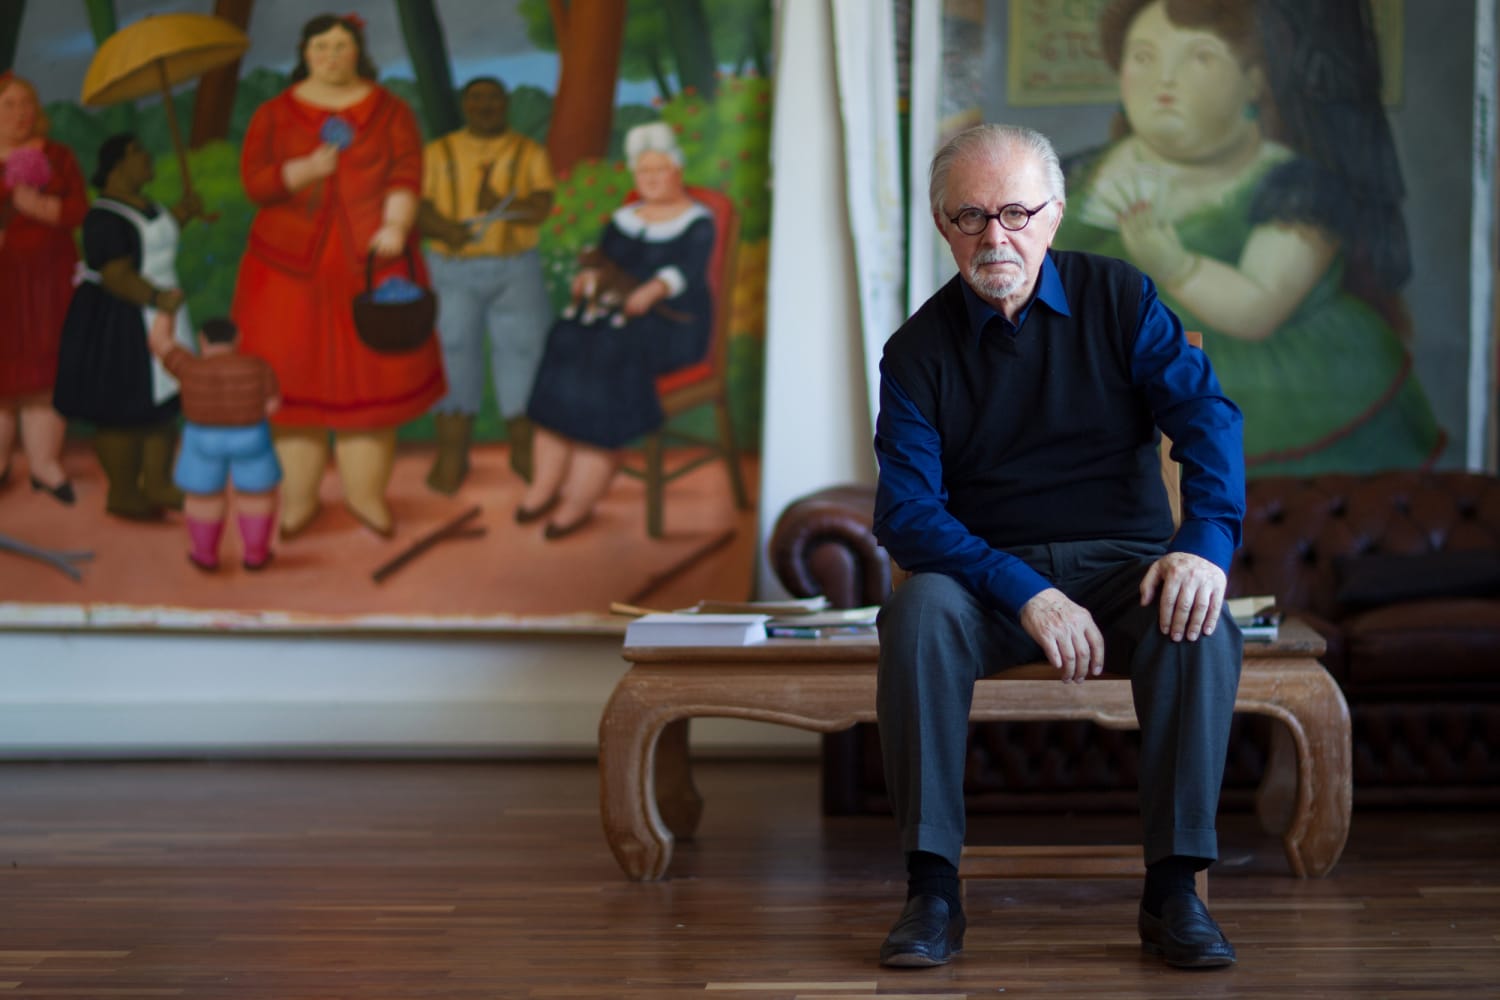 Colombian artist Fernando Botero, known for his plump figures, dies at age 91